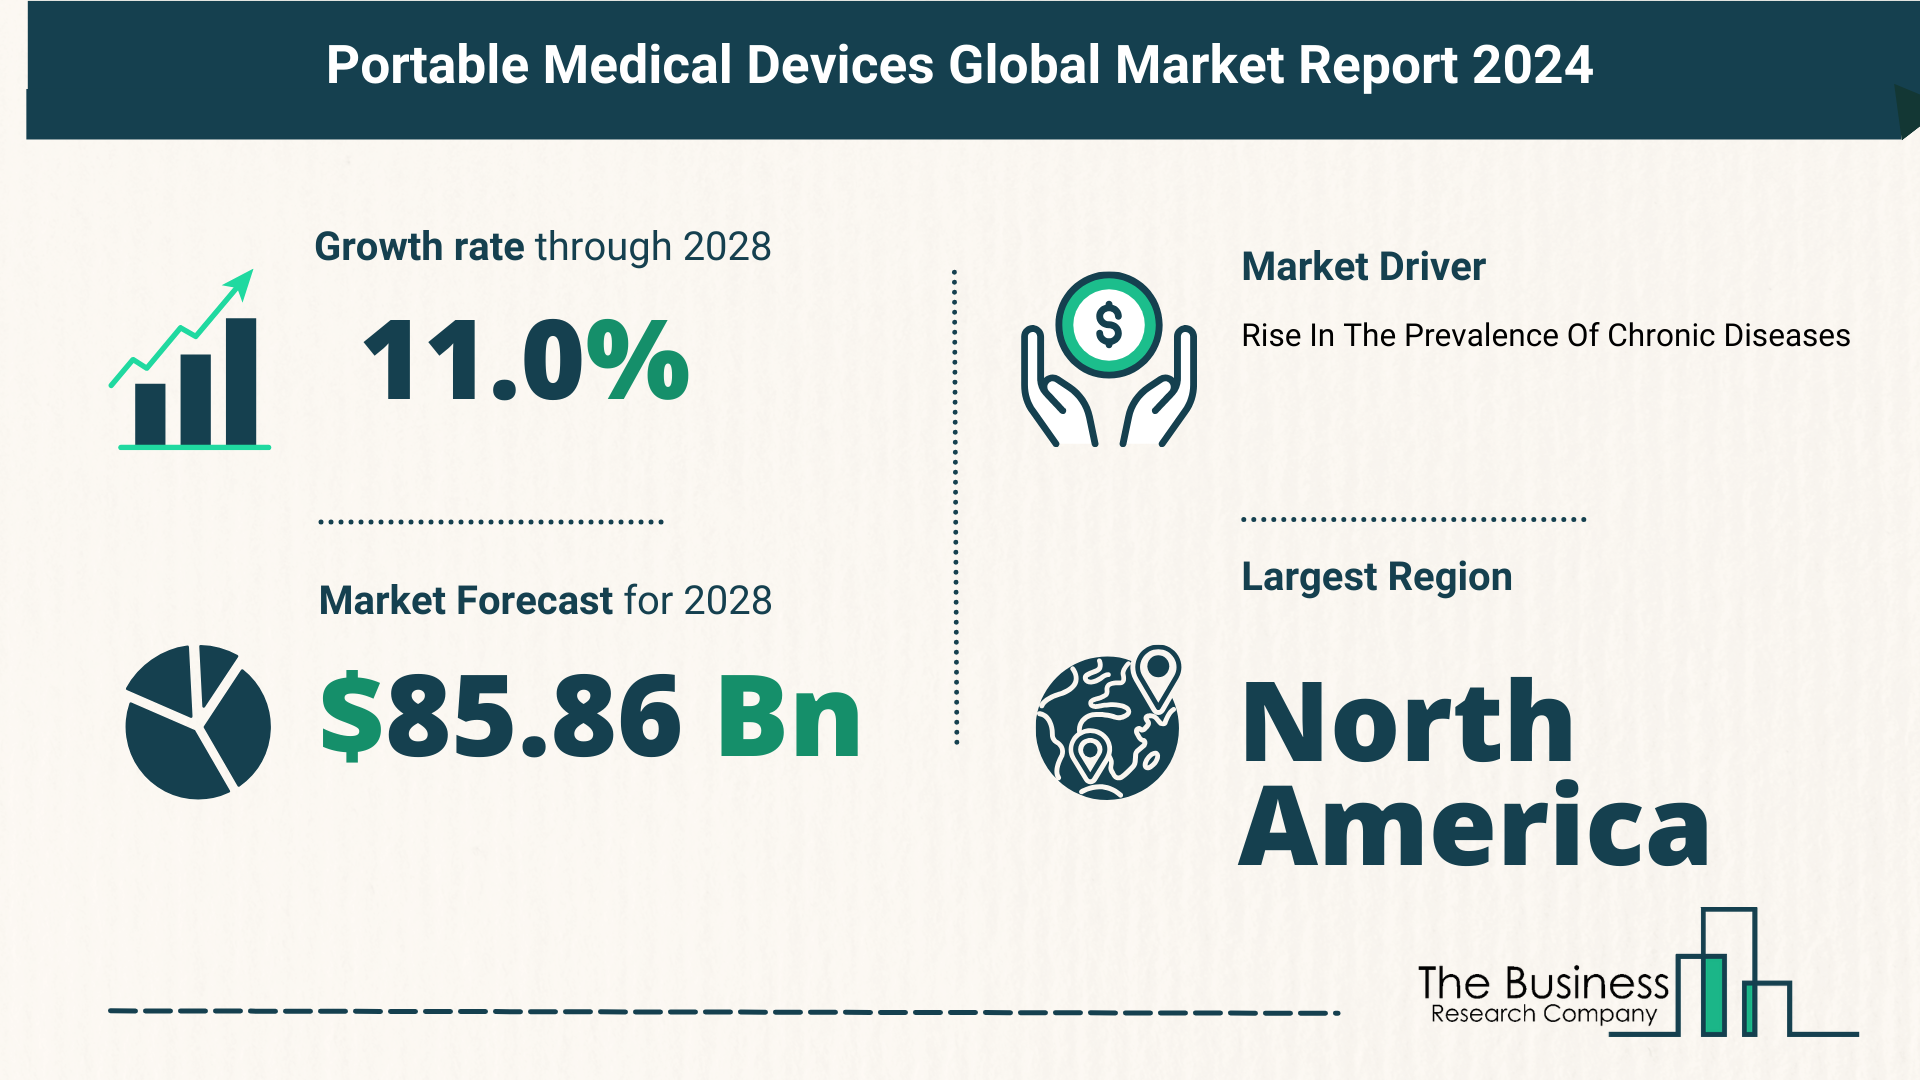 Portable Medical Devices Market Report 2024: Market Size, Drivers, And Trends